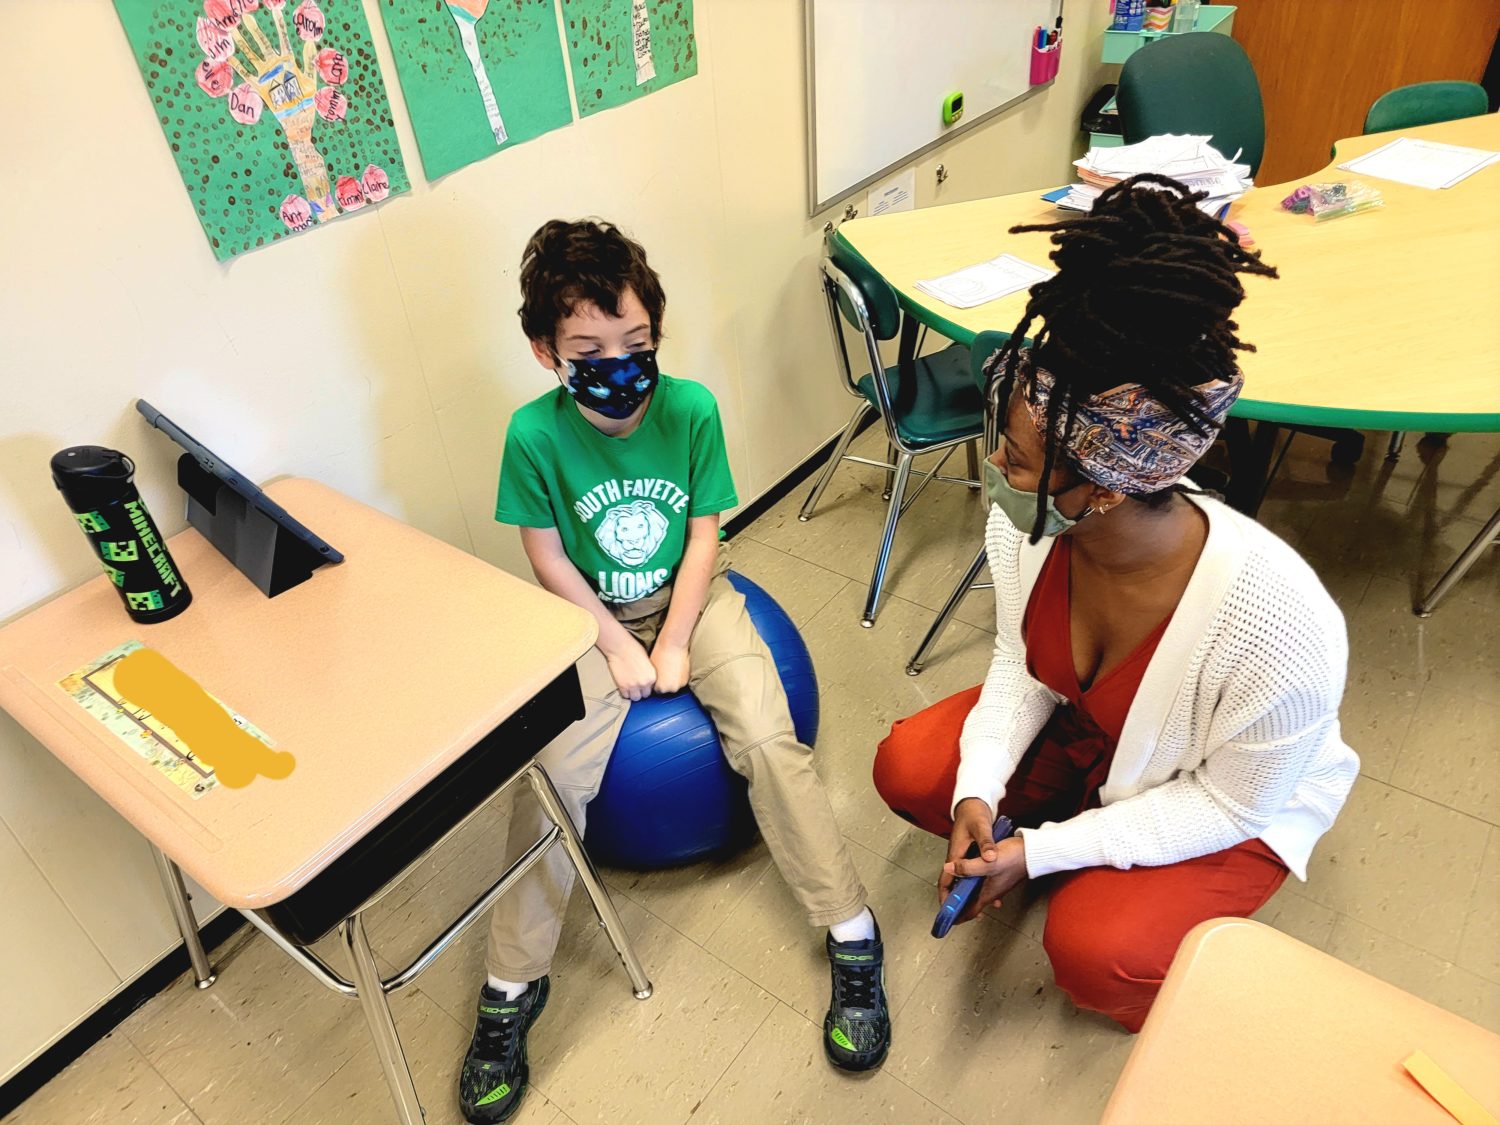 Howard University education student Daejah Parks talks with a South Fayette elementary schooler during the inaugural OTIS visit